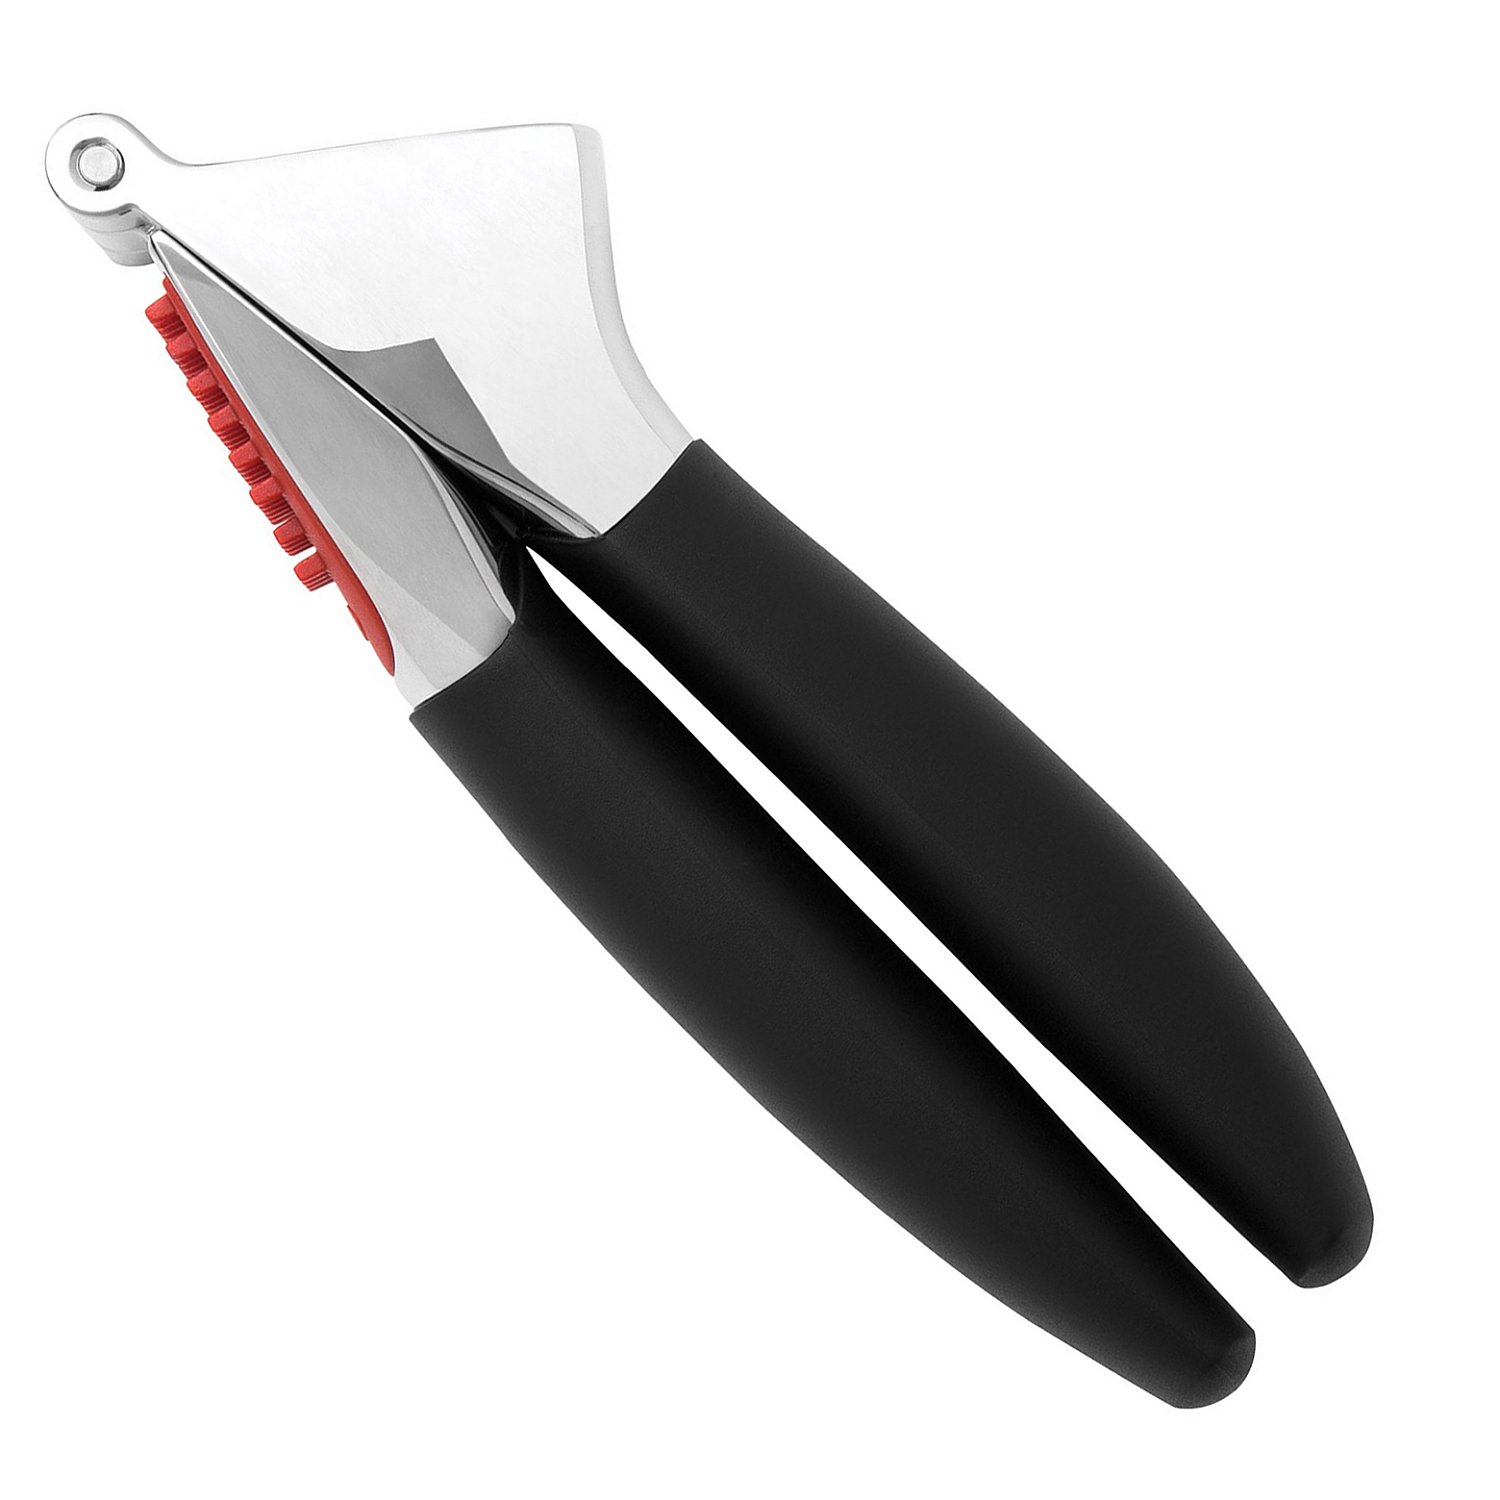 Oxo Garlic Press - Look for more garlic presses on our site